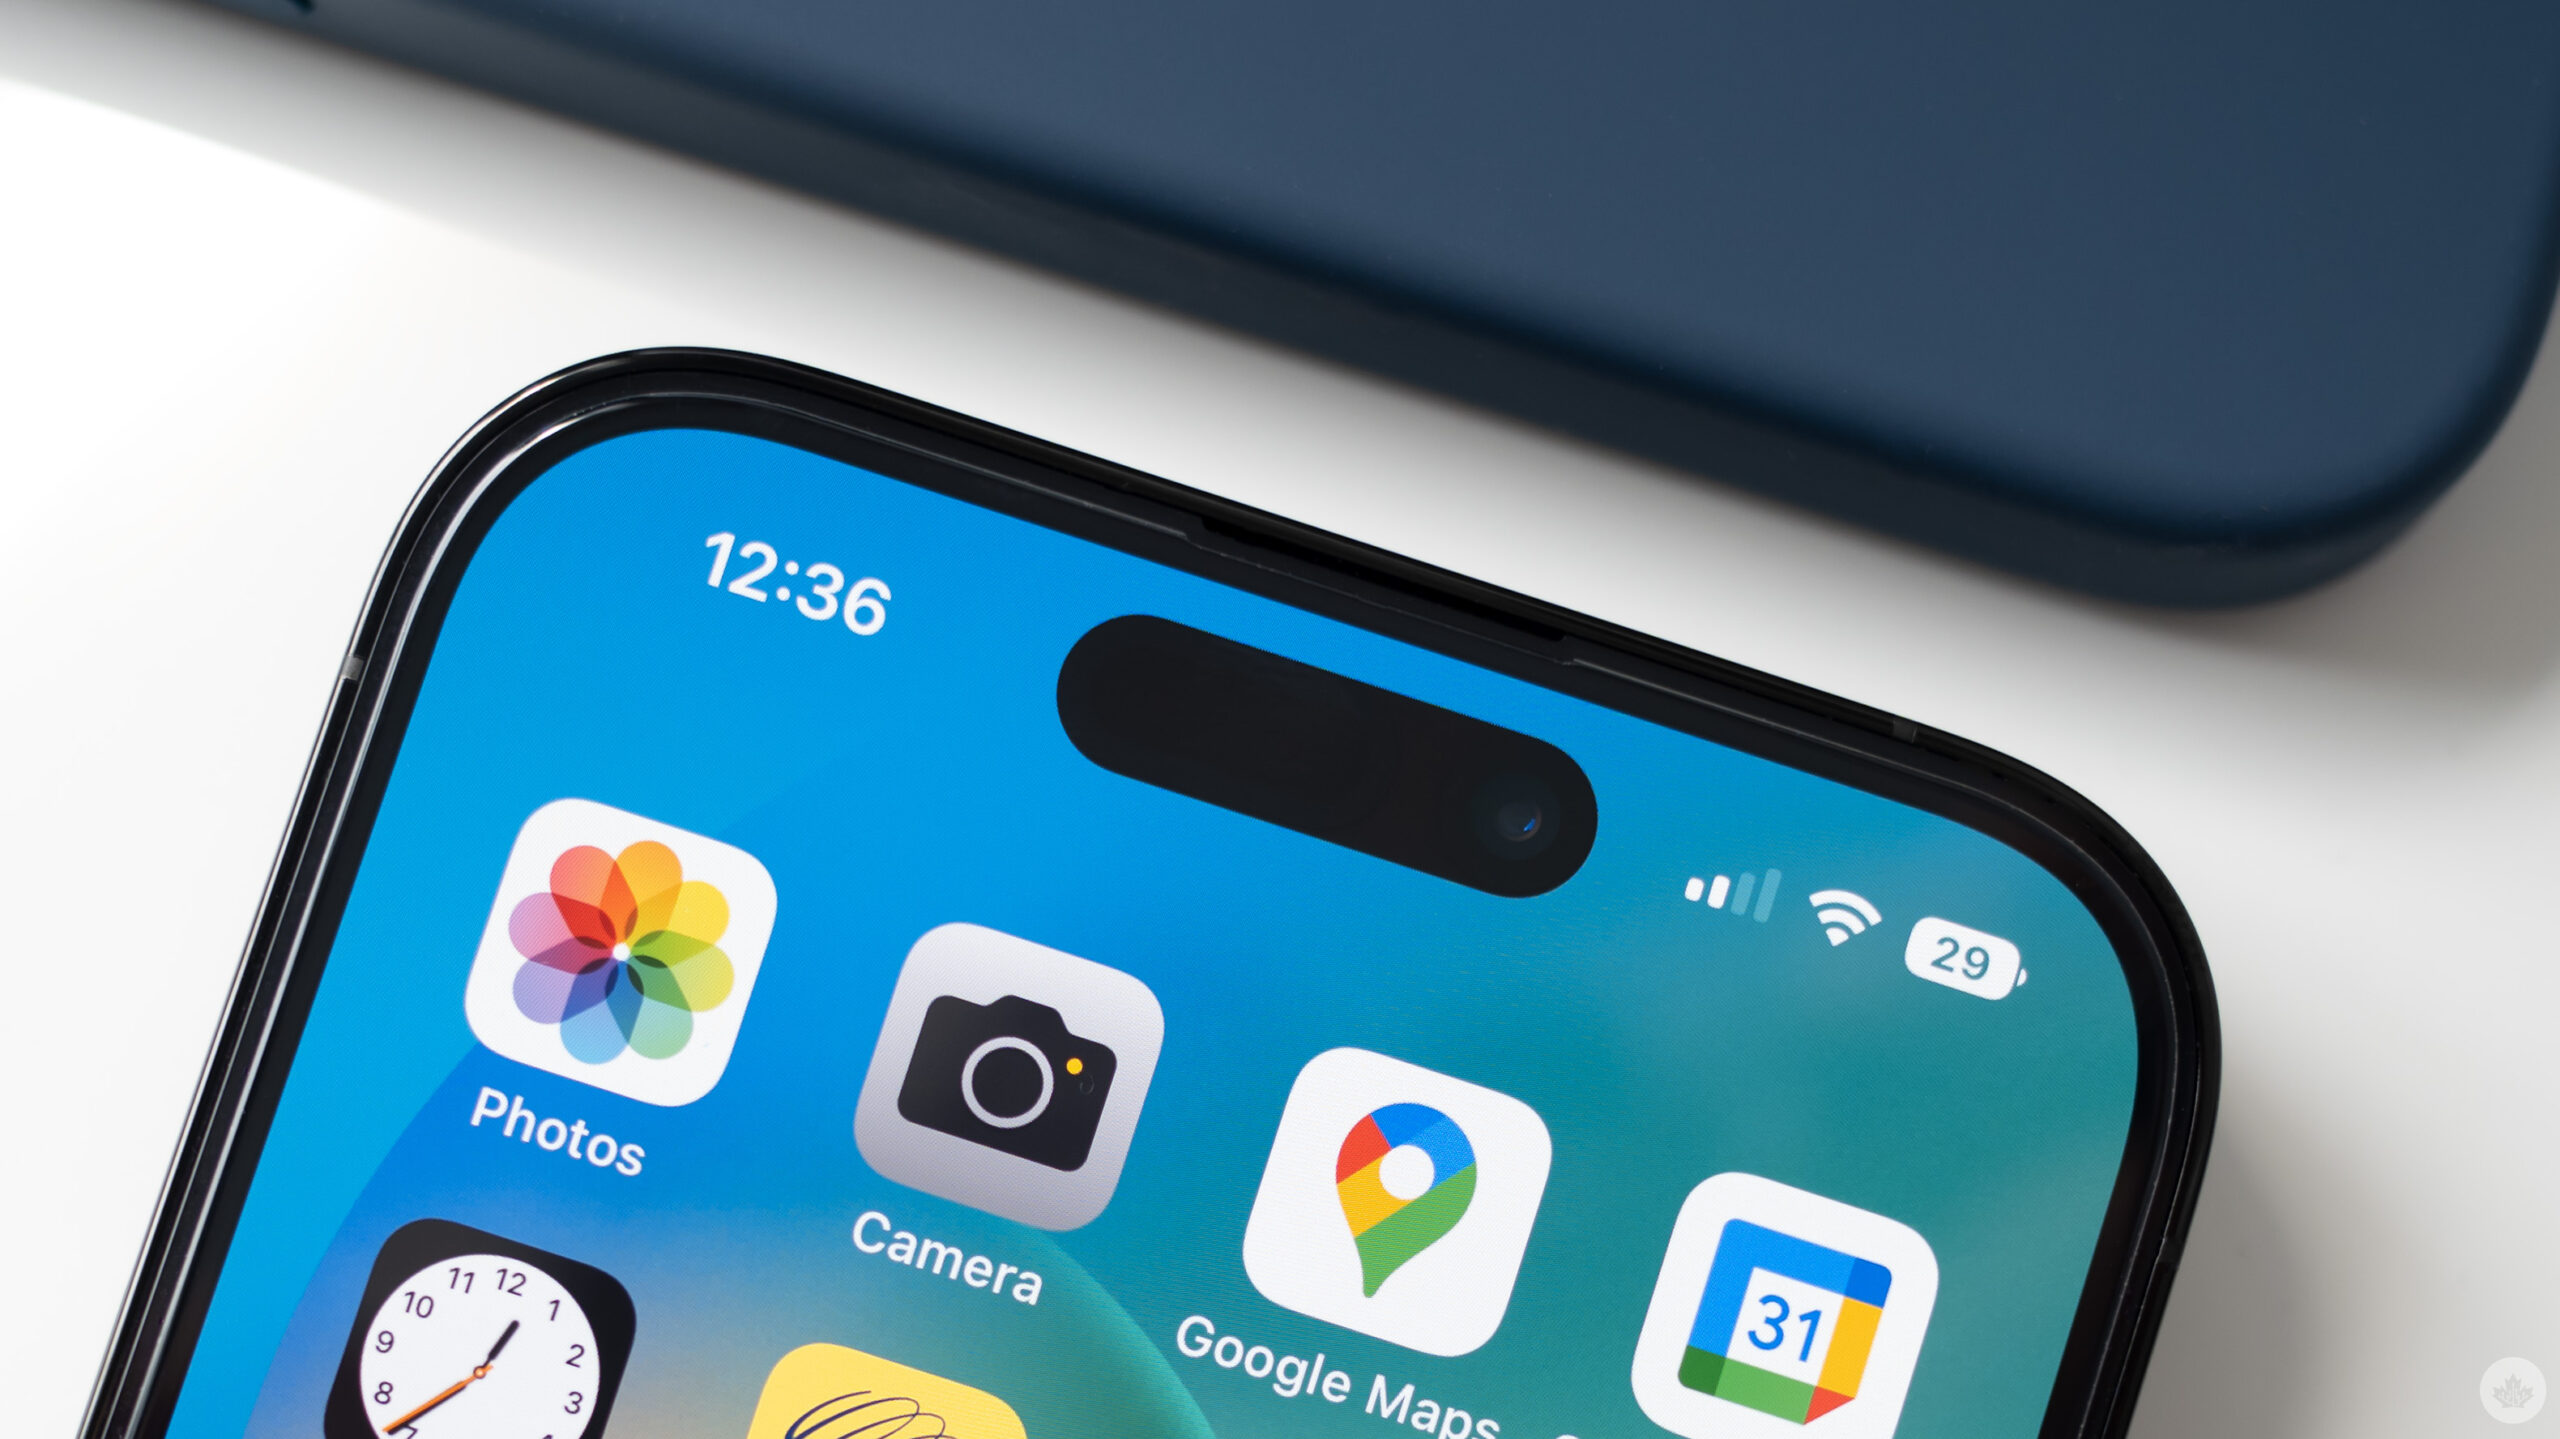 iOS 16.1 beta brings battery percentage indicator to iPhone mini and XR